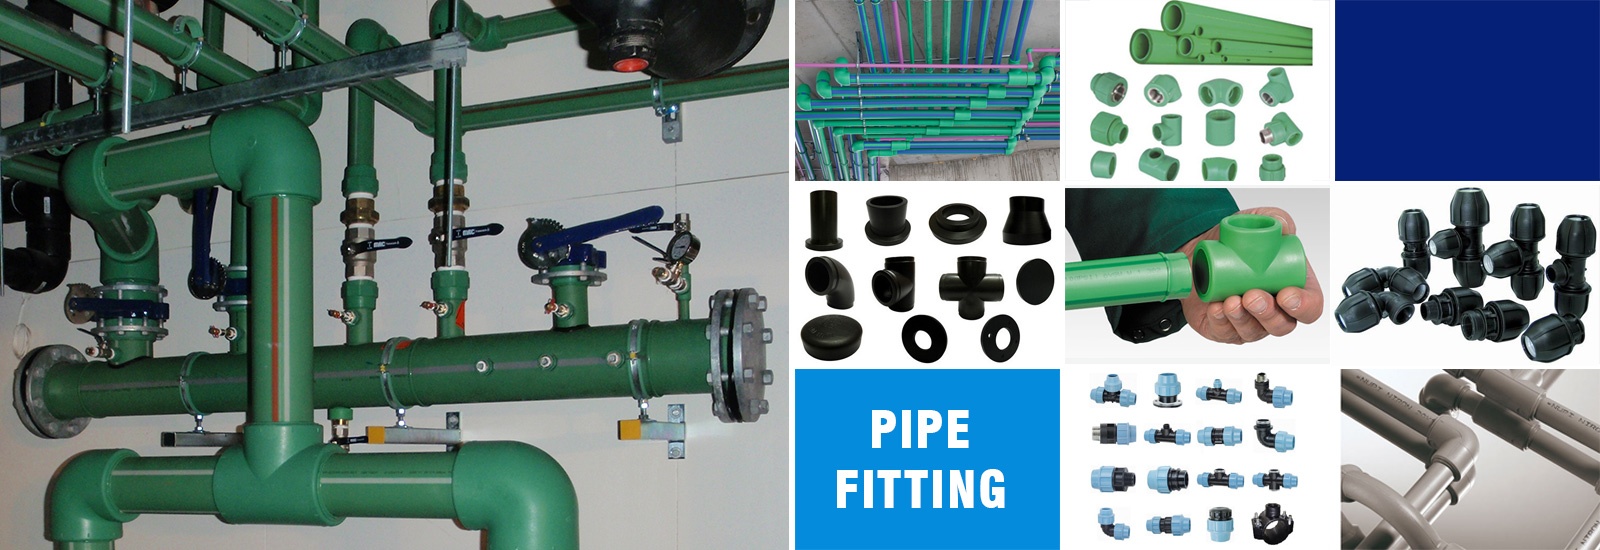 PP & HDPE Pipe Fitting